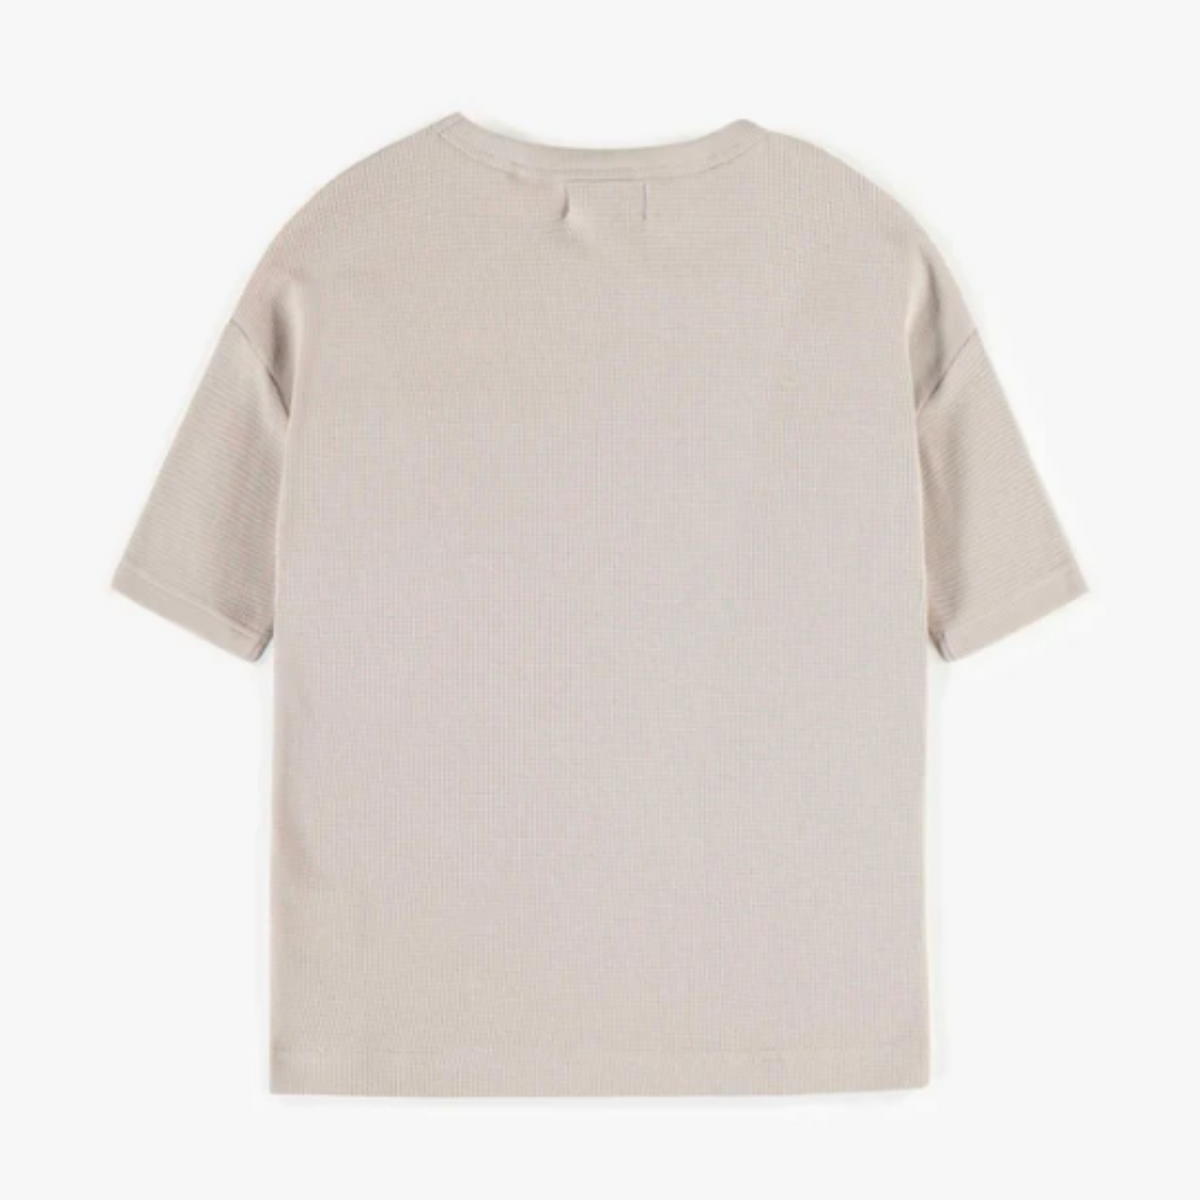 Grey T-shirt with short sleeves in embossed jersey, child